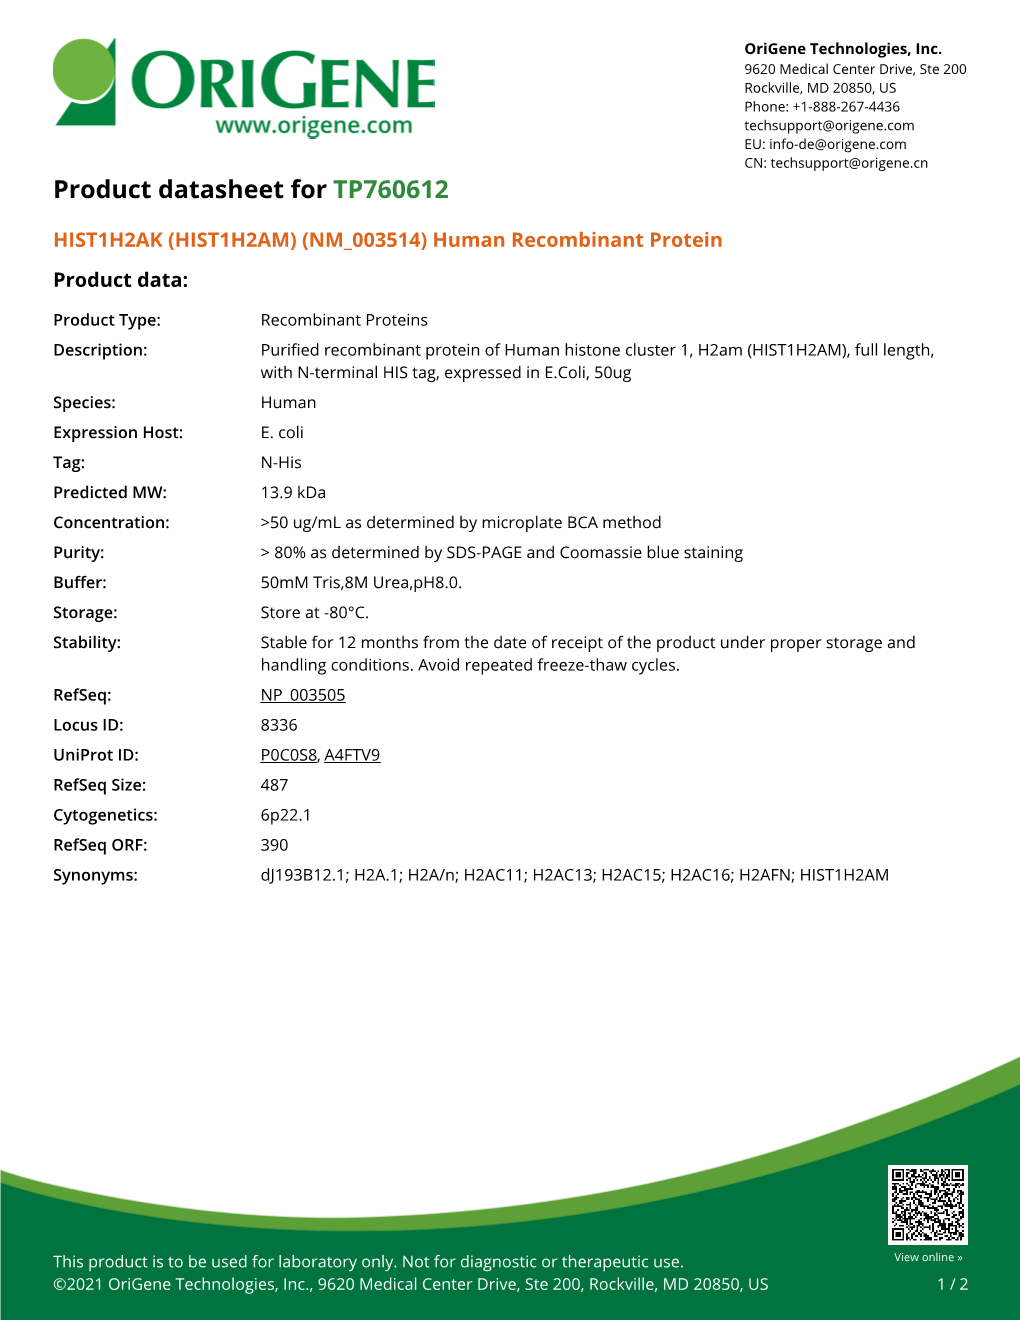 HIST1H2AK (HIST1H2AM) (NM 003514) Human Recombinant Protein Product Data